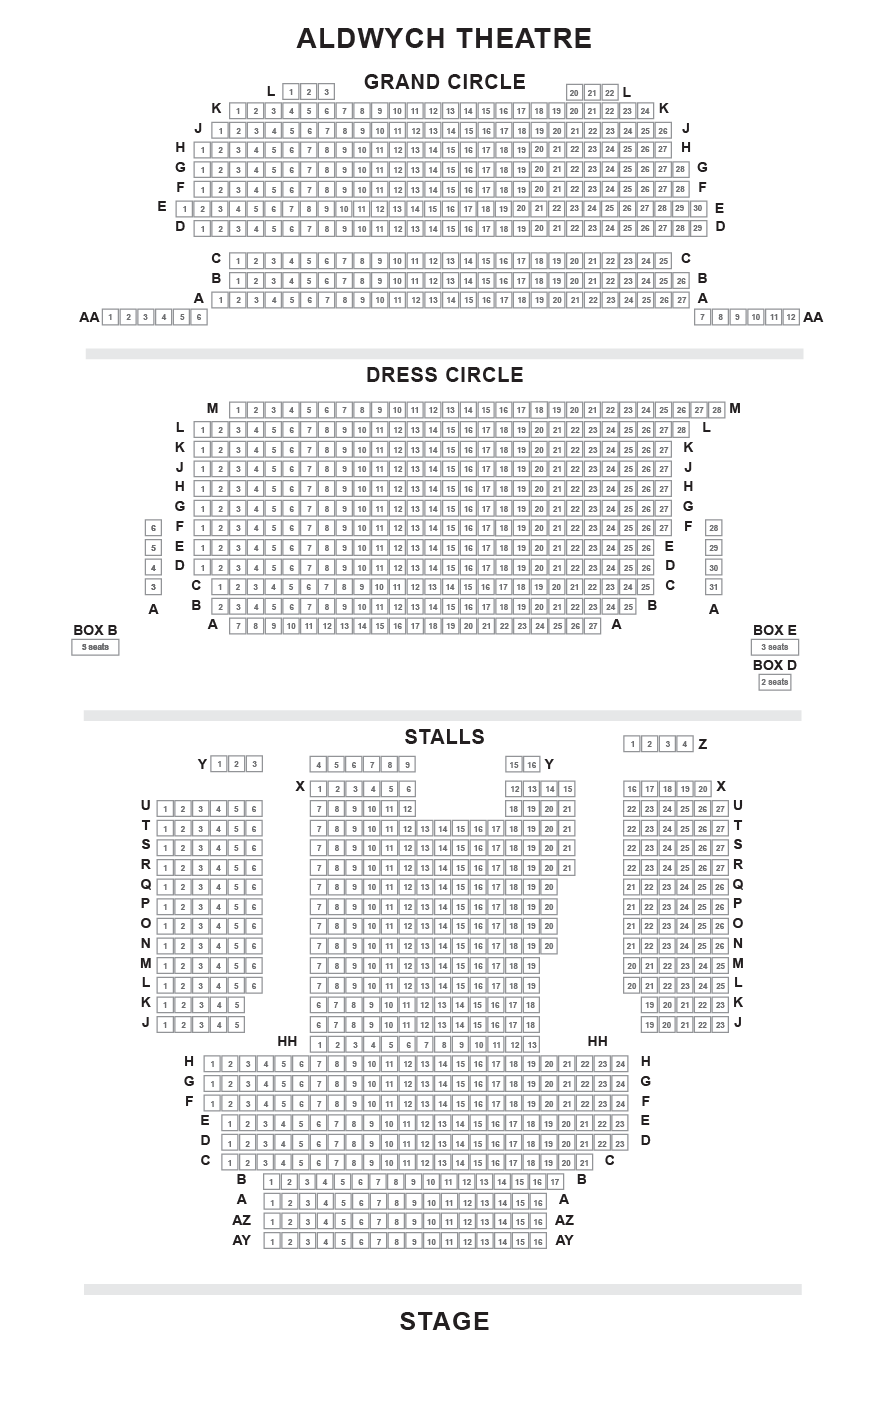 Aldwych Theatre seating plan